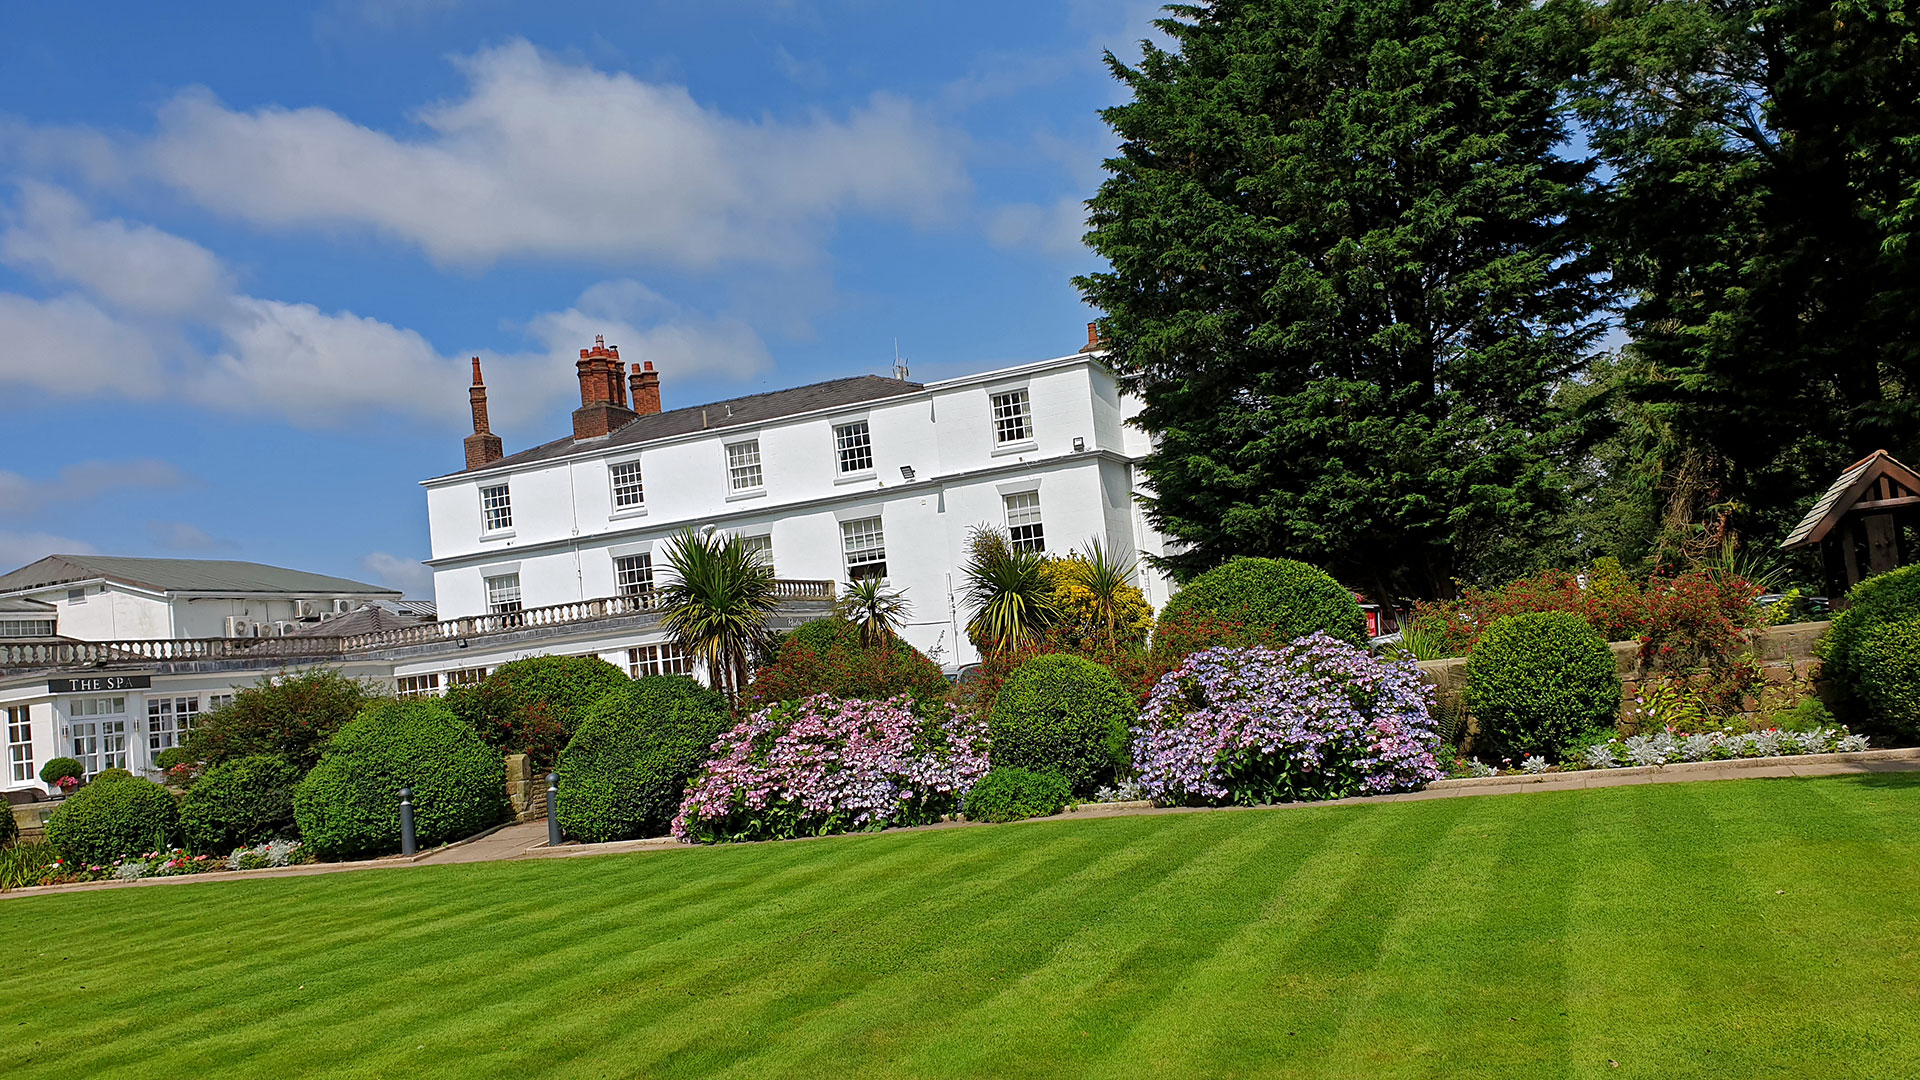 Hotel exterior overlooking the lawn - Rowton Hall Hotel, Chester